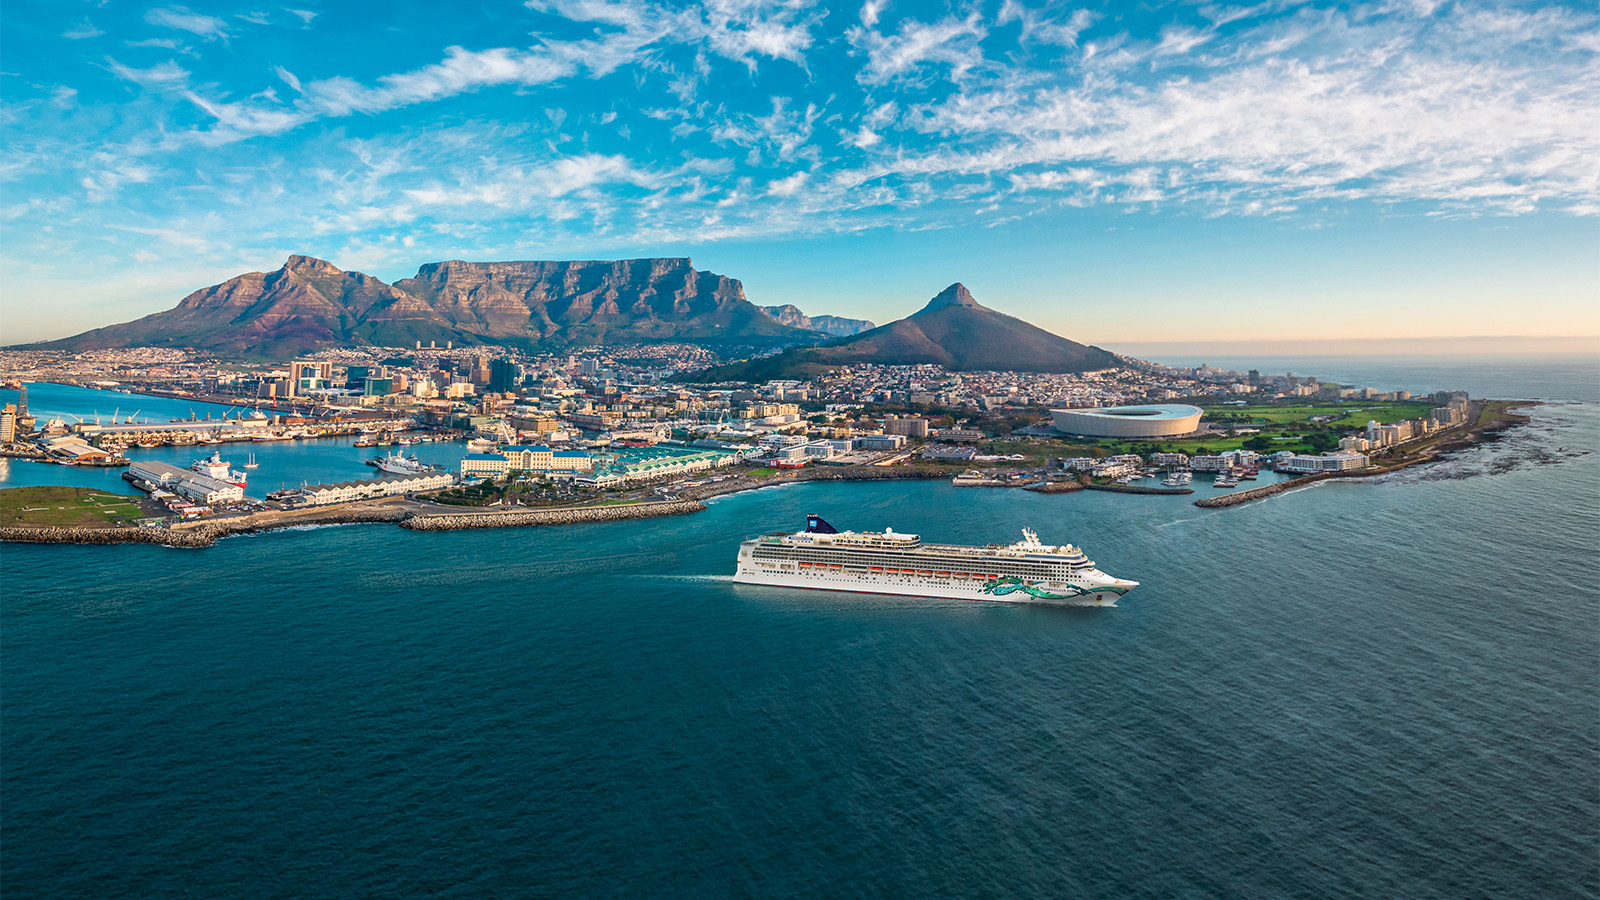 Norwegian Jade became the first vessel in Norwegian Cruise Lines 18-ship fleet to homeport from Cape Town South Africa 